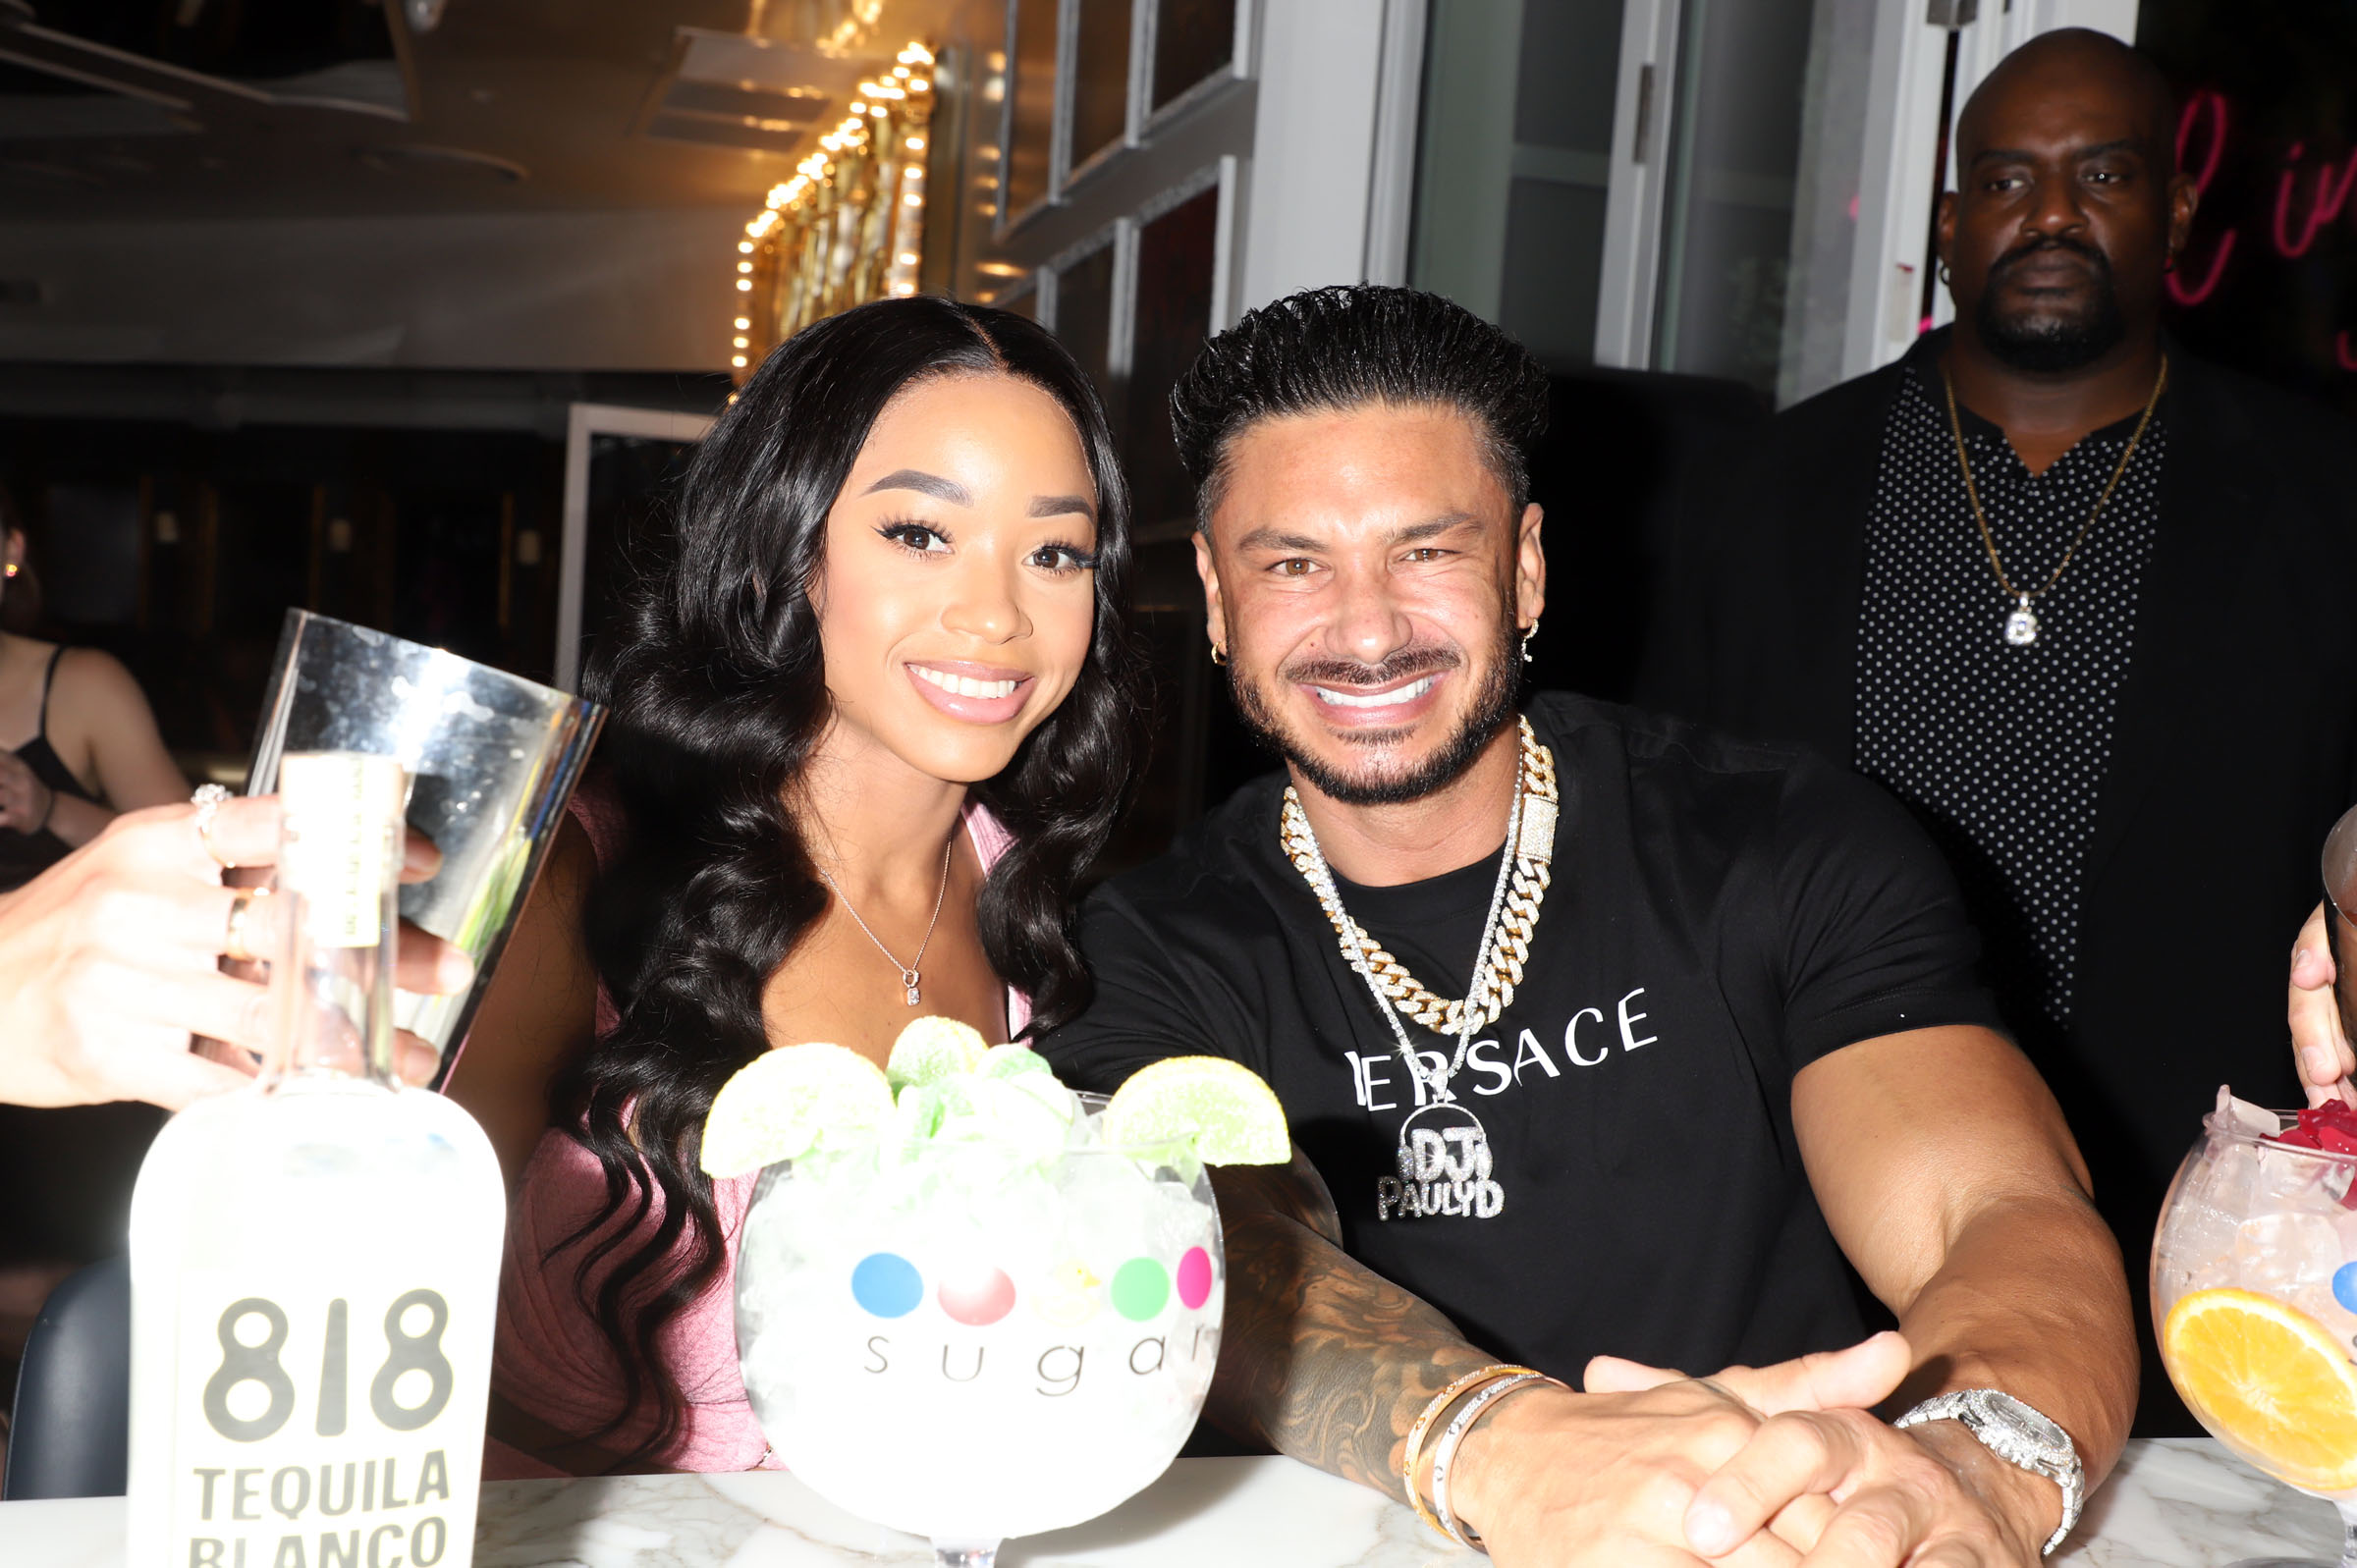 See rare photos of Pauly D and his daughter on her 10th birthday